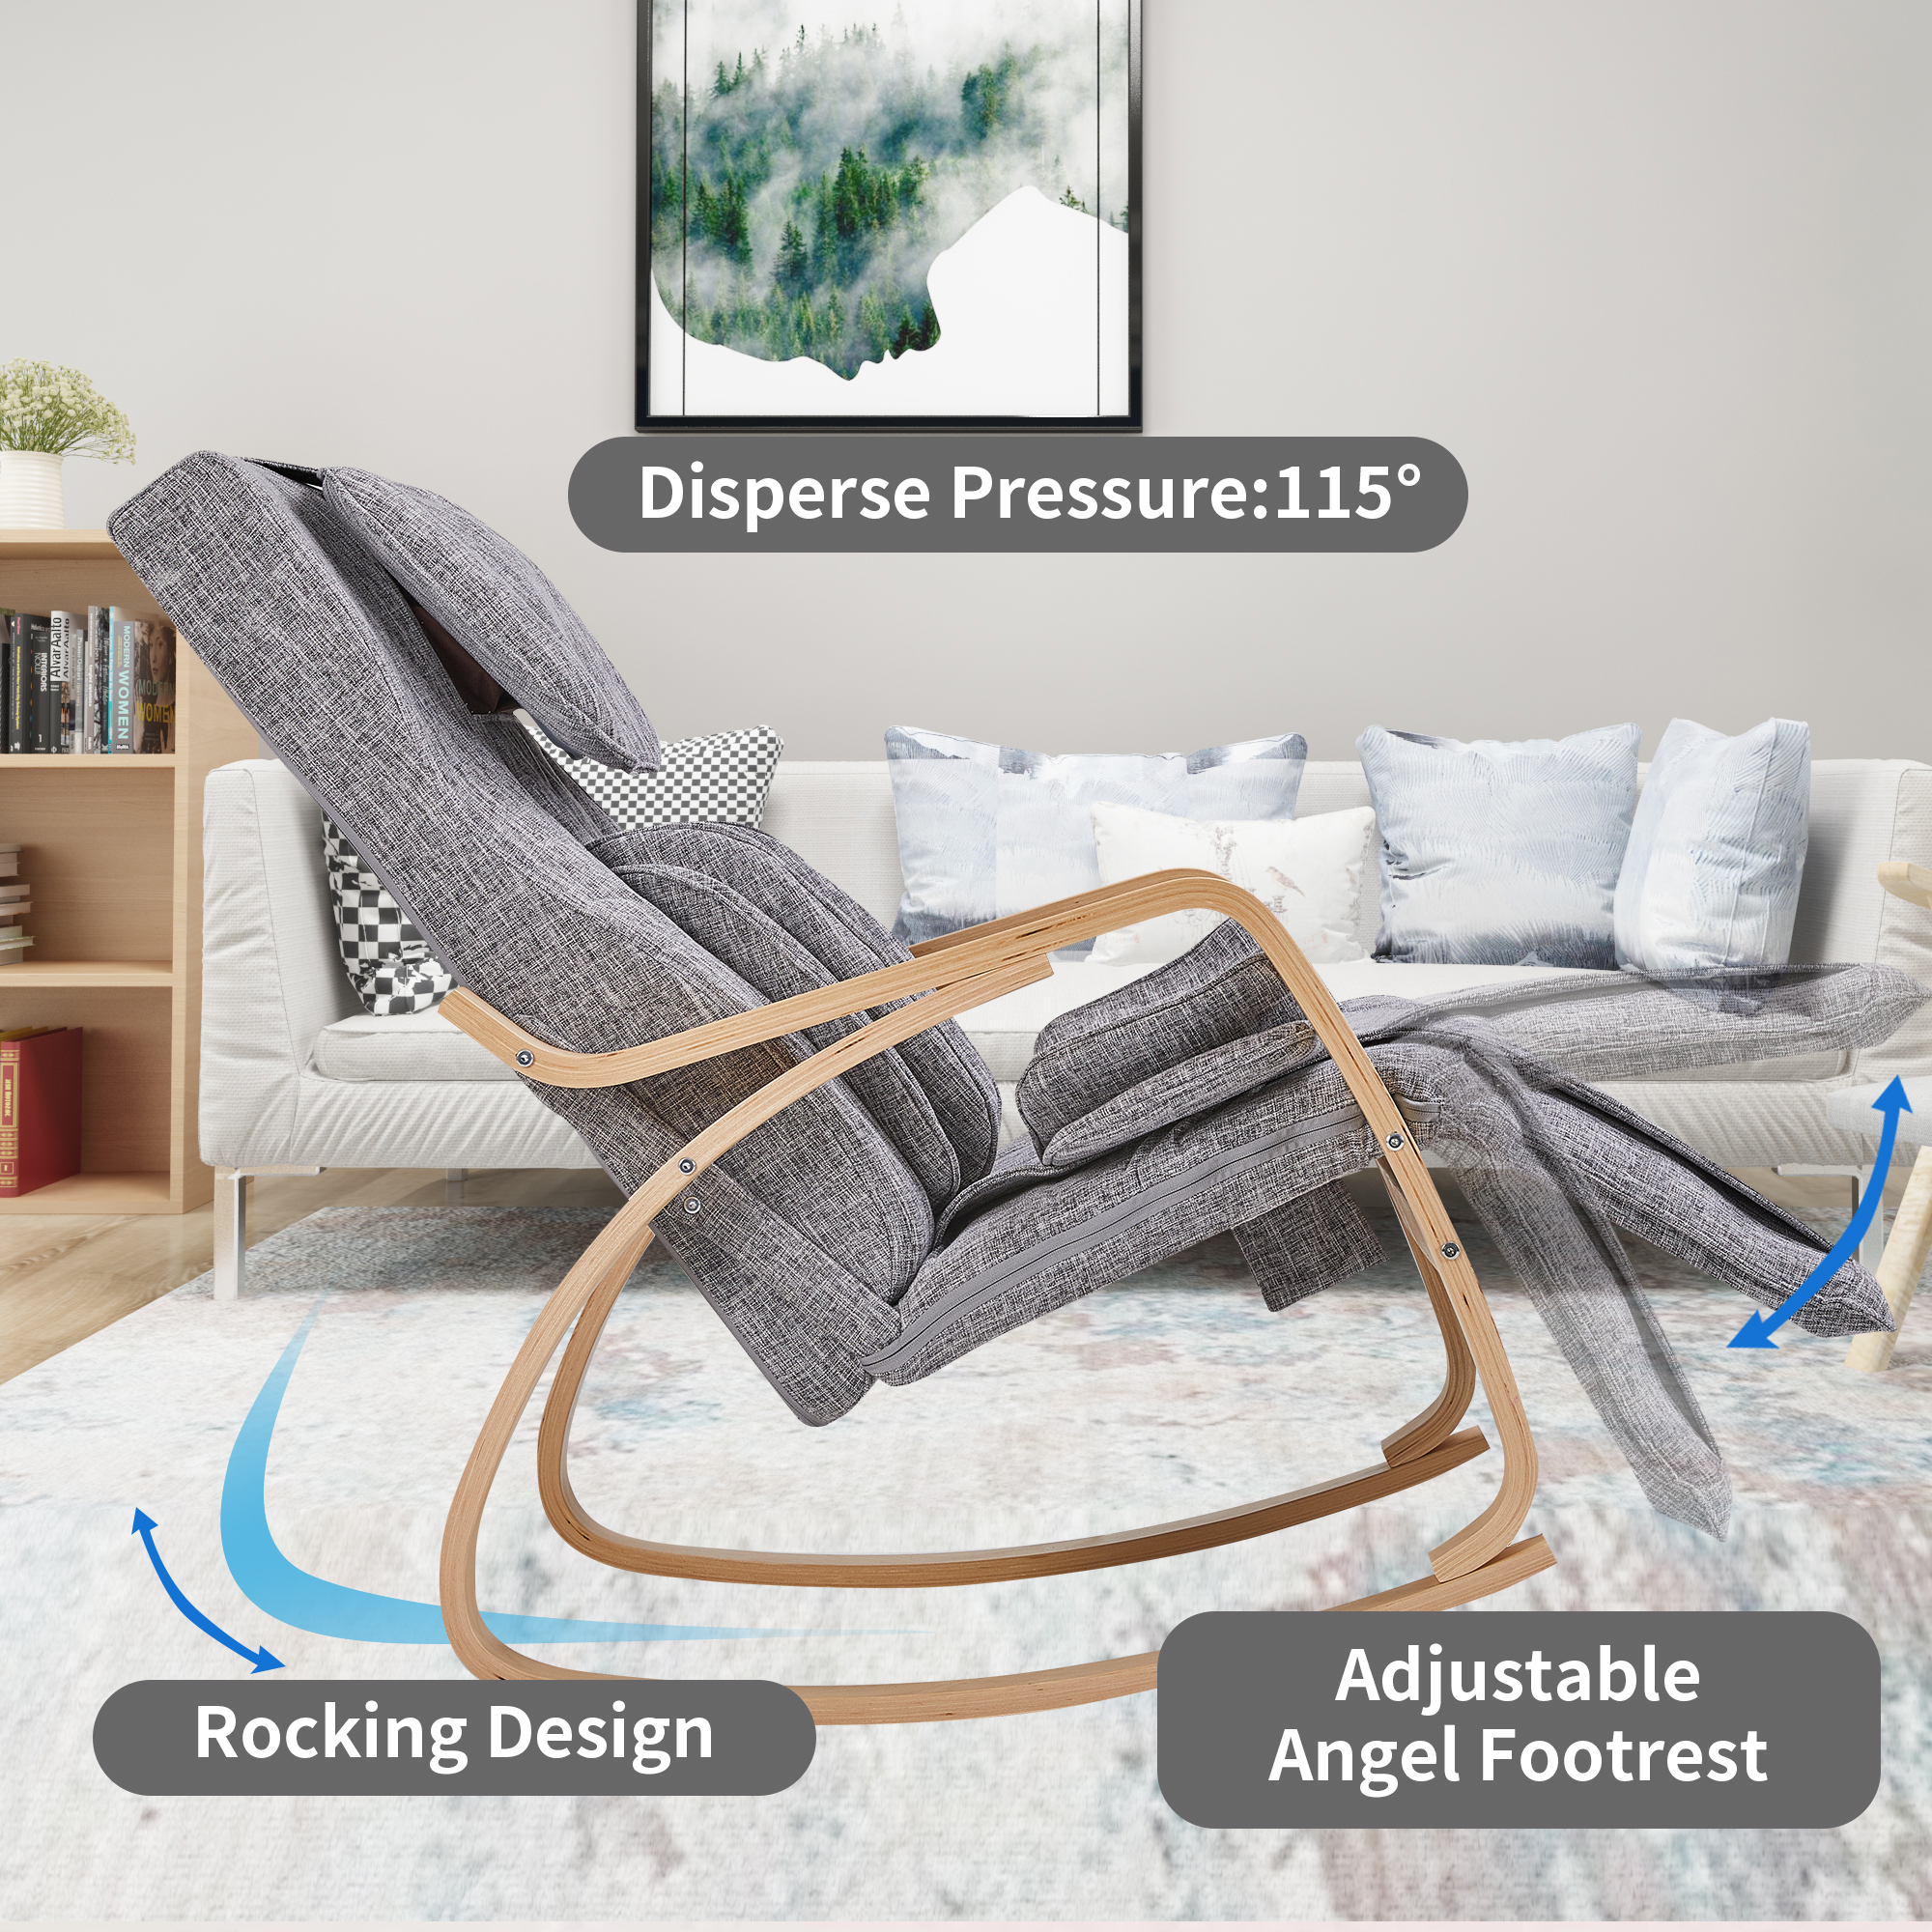 Full massage function-Air pressure-Comfortable Relax Rocking Chair, Lounge Chair Relax Chair with Cotton Fabric Cushion ， White and gray-CASAINC